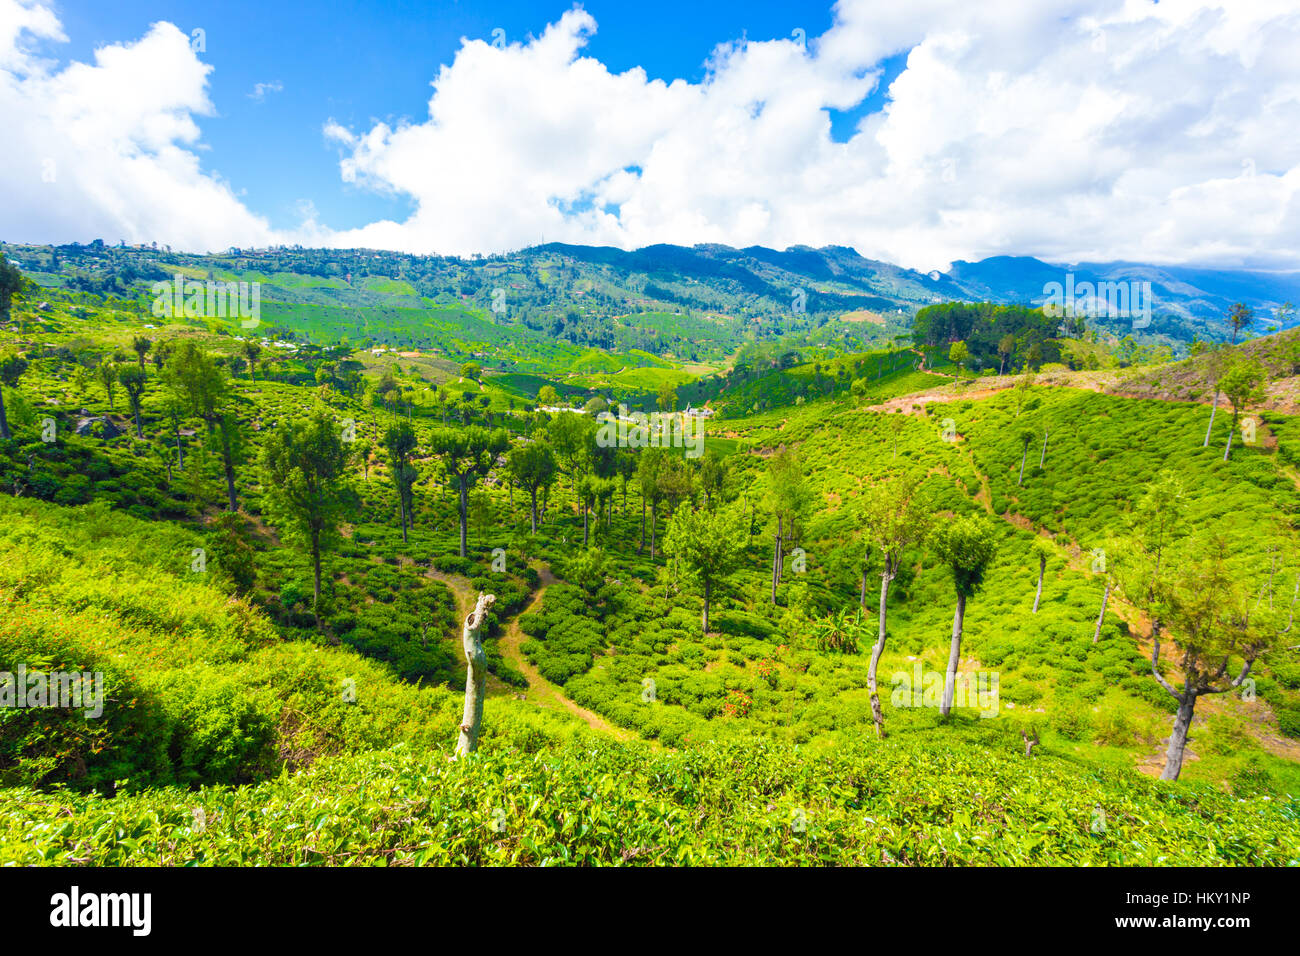 Beautiful scenic landscape overview of green tea plantation estate valley and surrounding mountains around manicured tea plants Stock Photo